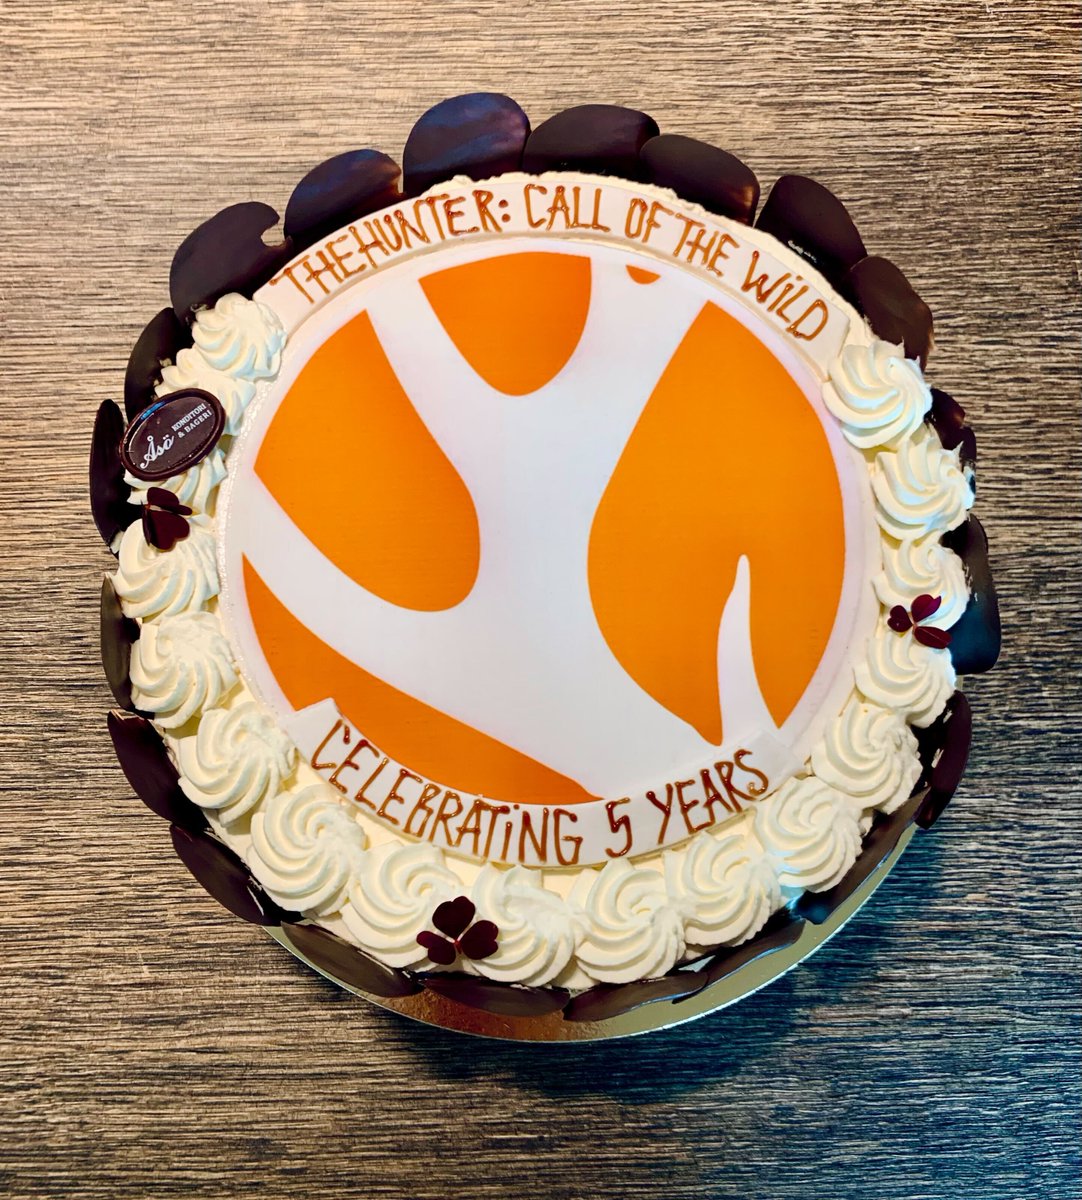 It’s theHunter: Cake of the Wild, isn't it? These high caliber calories definitely hit right. Happy fifth birthday, @theHunterCOTW! Here’s to many more. 🎂

#COTWTurnsFive https://t.co/aAV51KC3jD